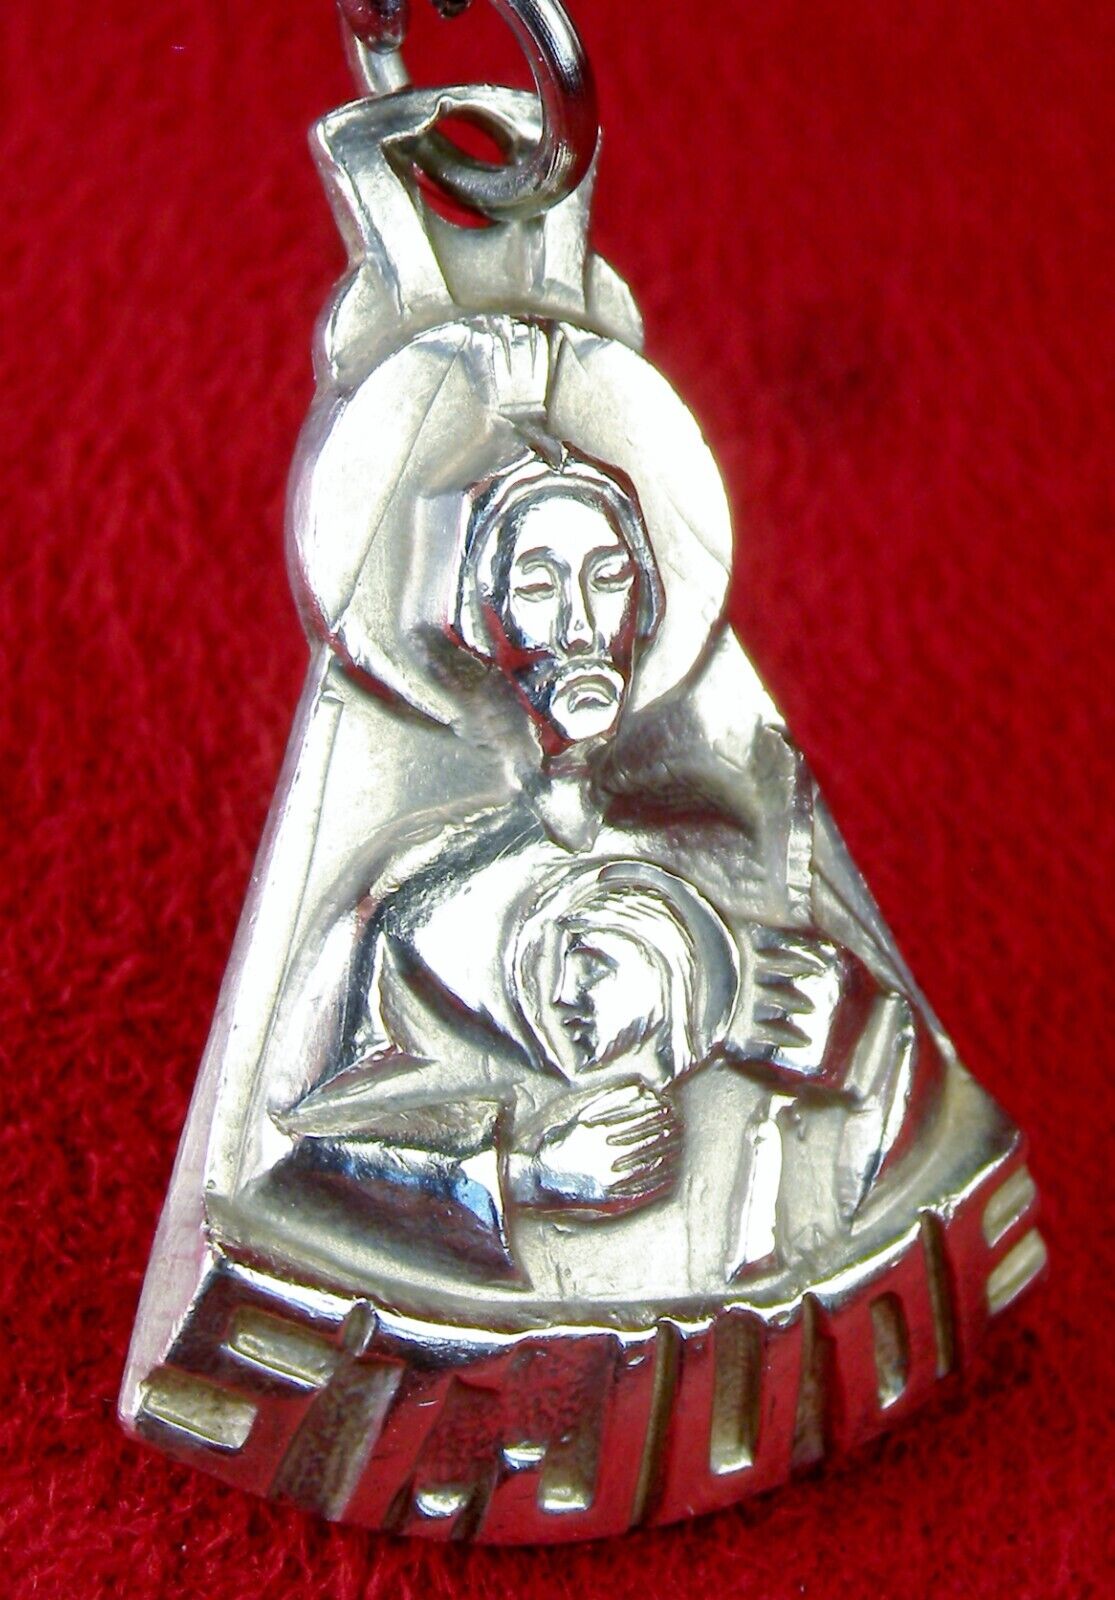 Carmelite Nun's Vintage Sterling Silver Impossible Lost Causes St. JUDE Medal